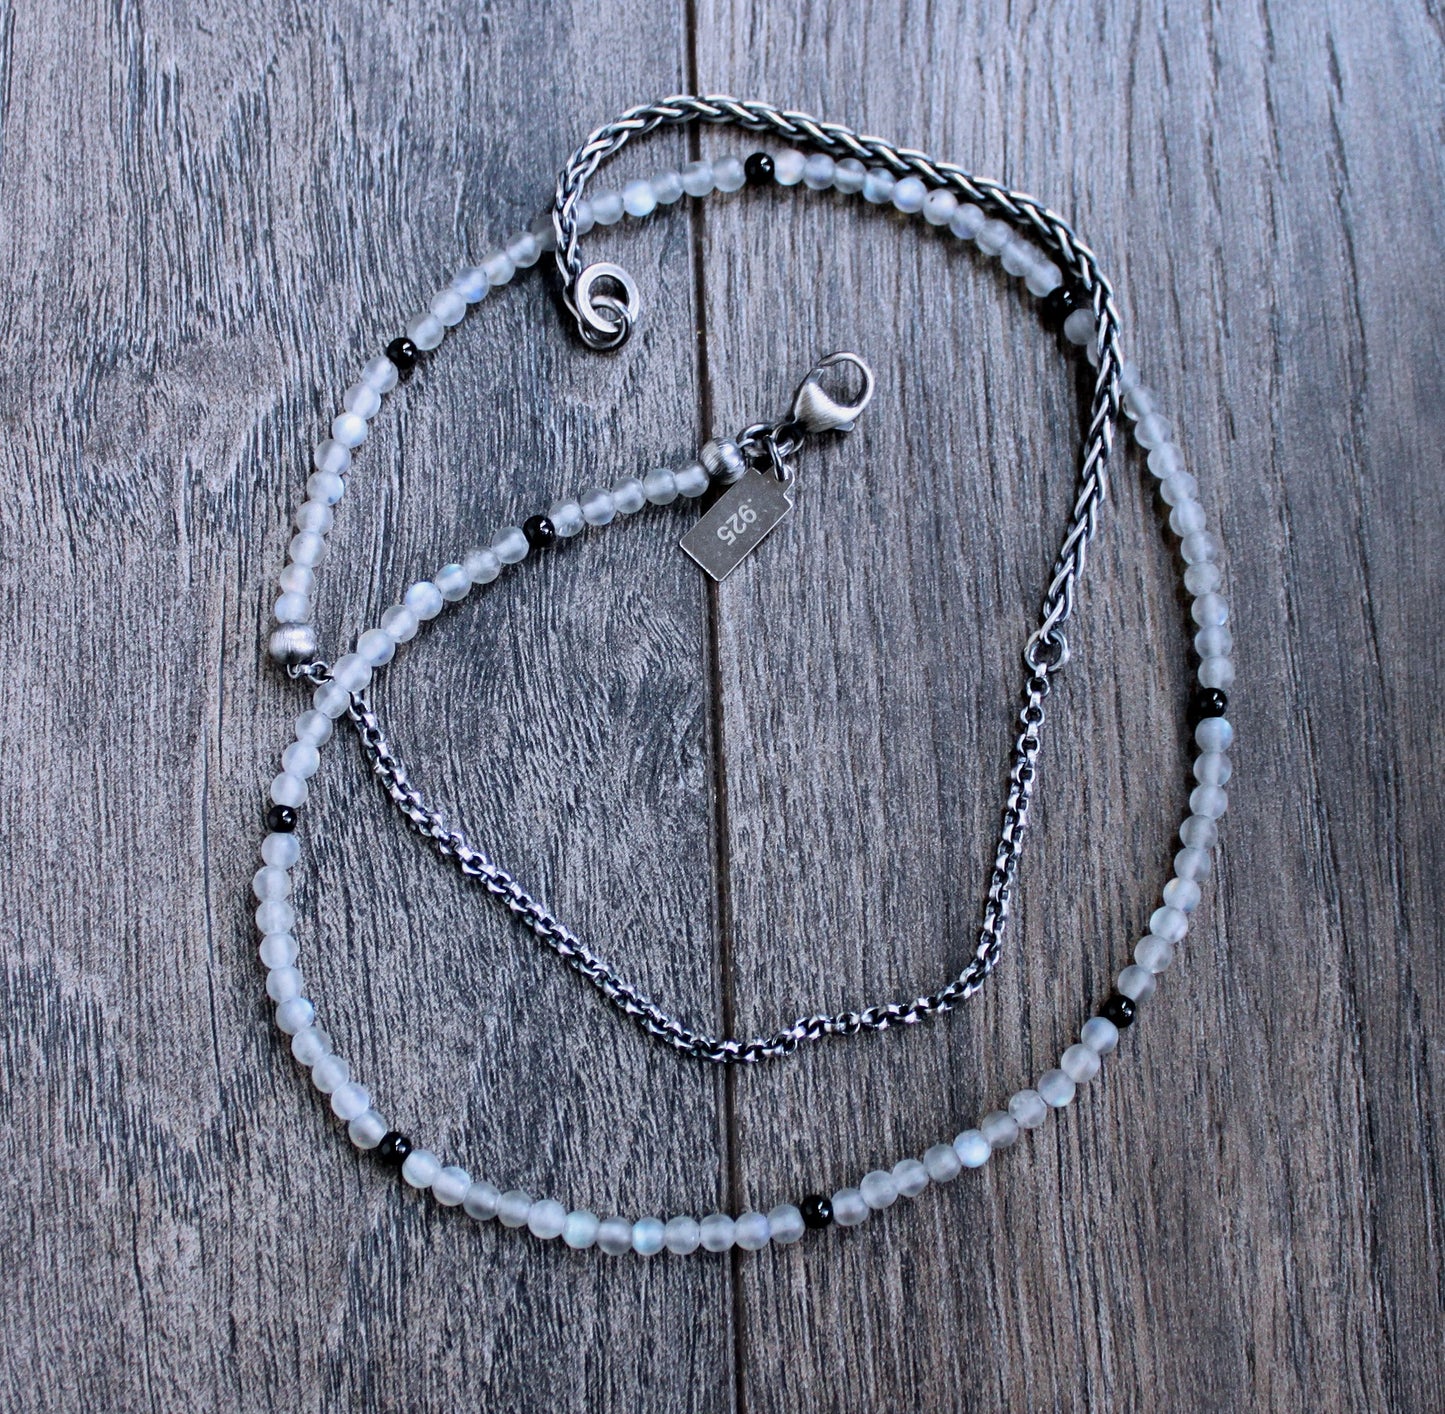 Men's hybrid chain and bead necklace